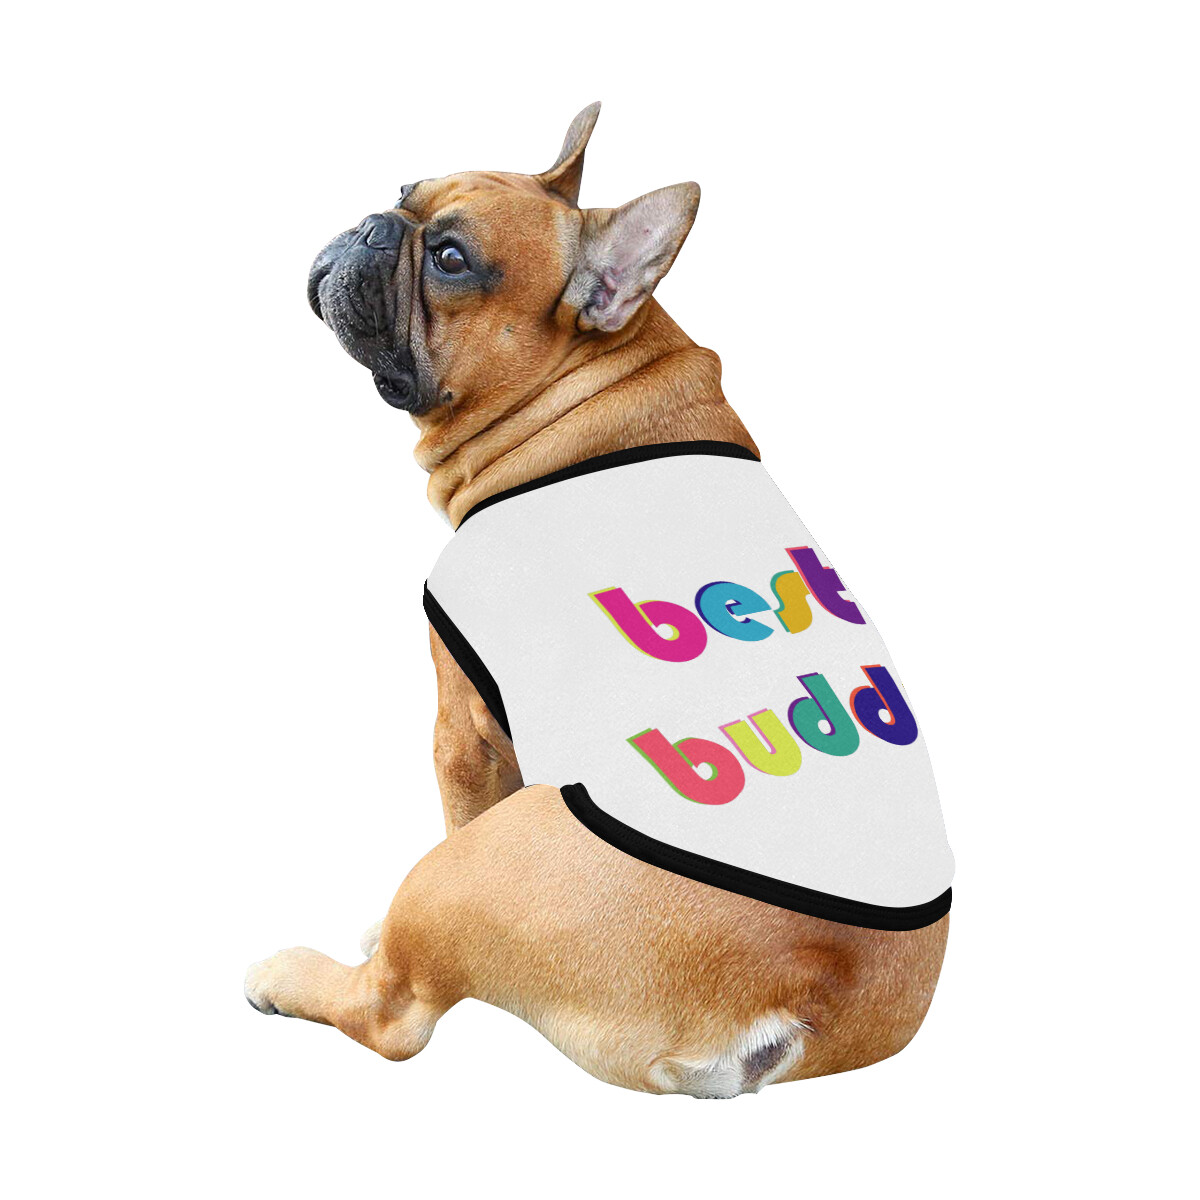 🐕 Best buddy Dog shirt, Dog Tank Top, Dog t-shirt, Dog clothes, Gifts, front back print, 7 sizes XS to 3XL, dog gifts, white